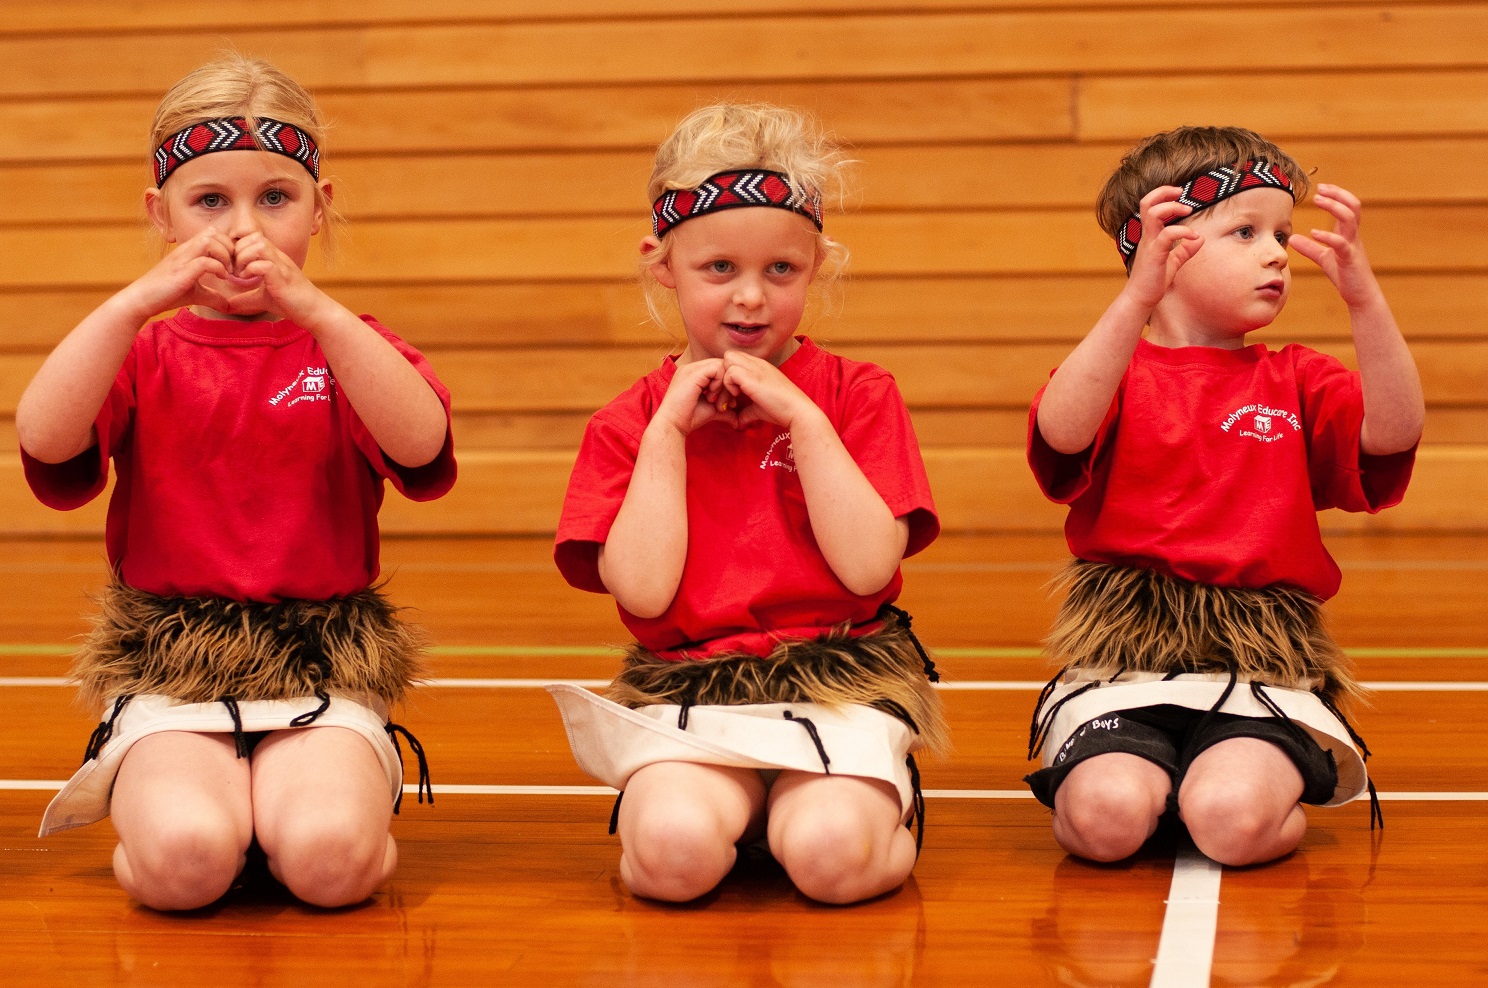 Children and their whanau gathered for a celebration of community and learning at the Cromwell...